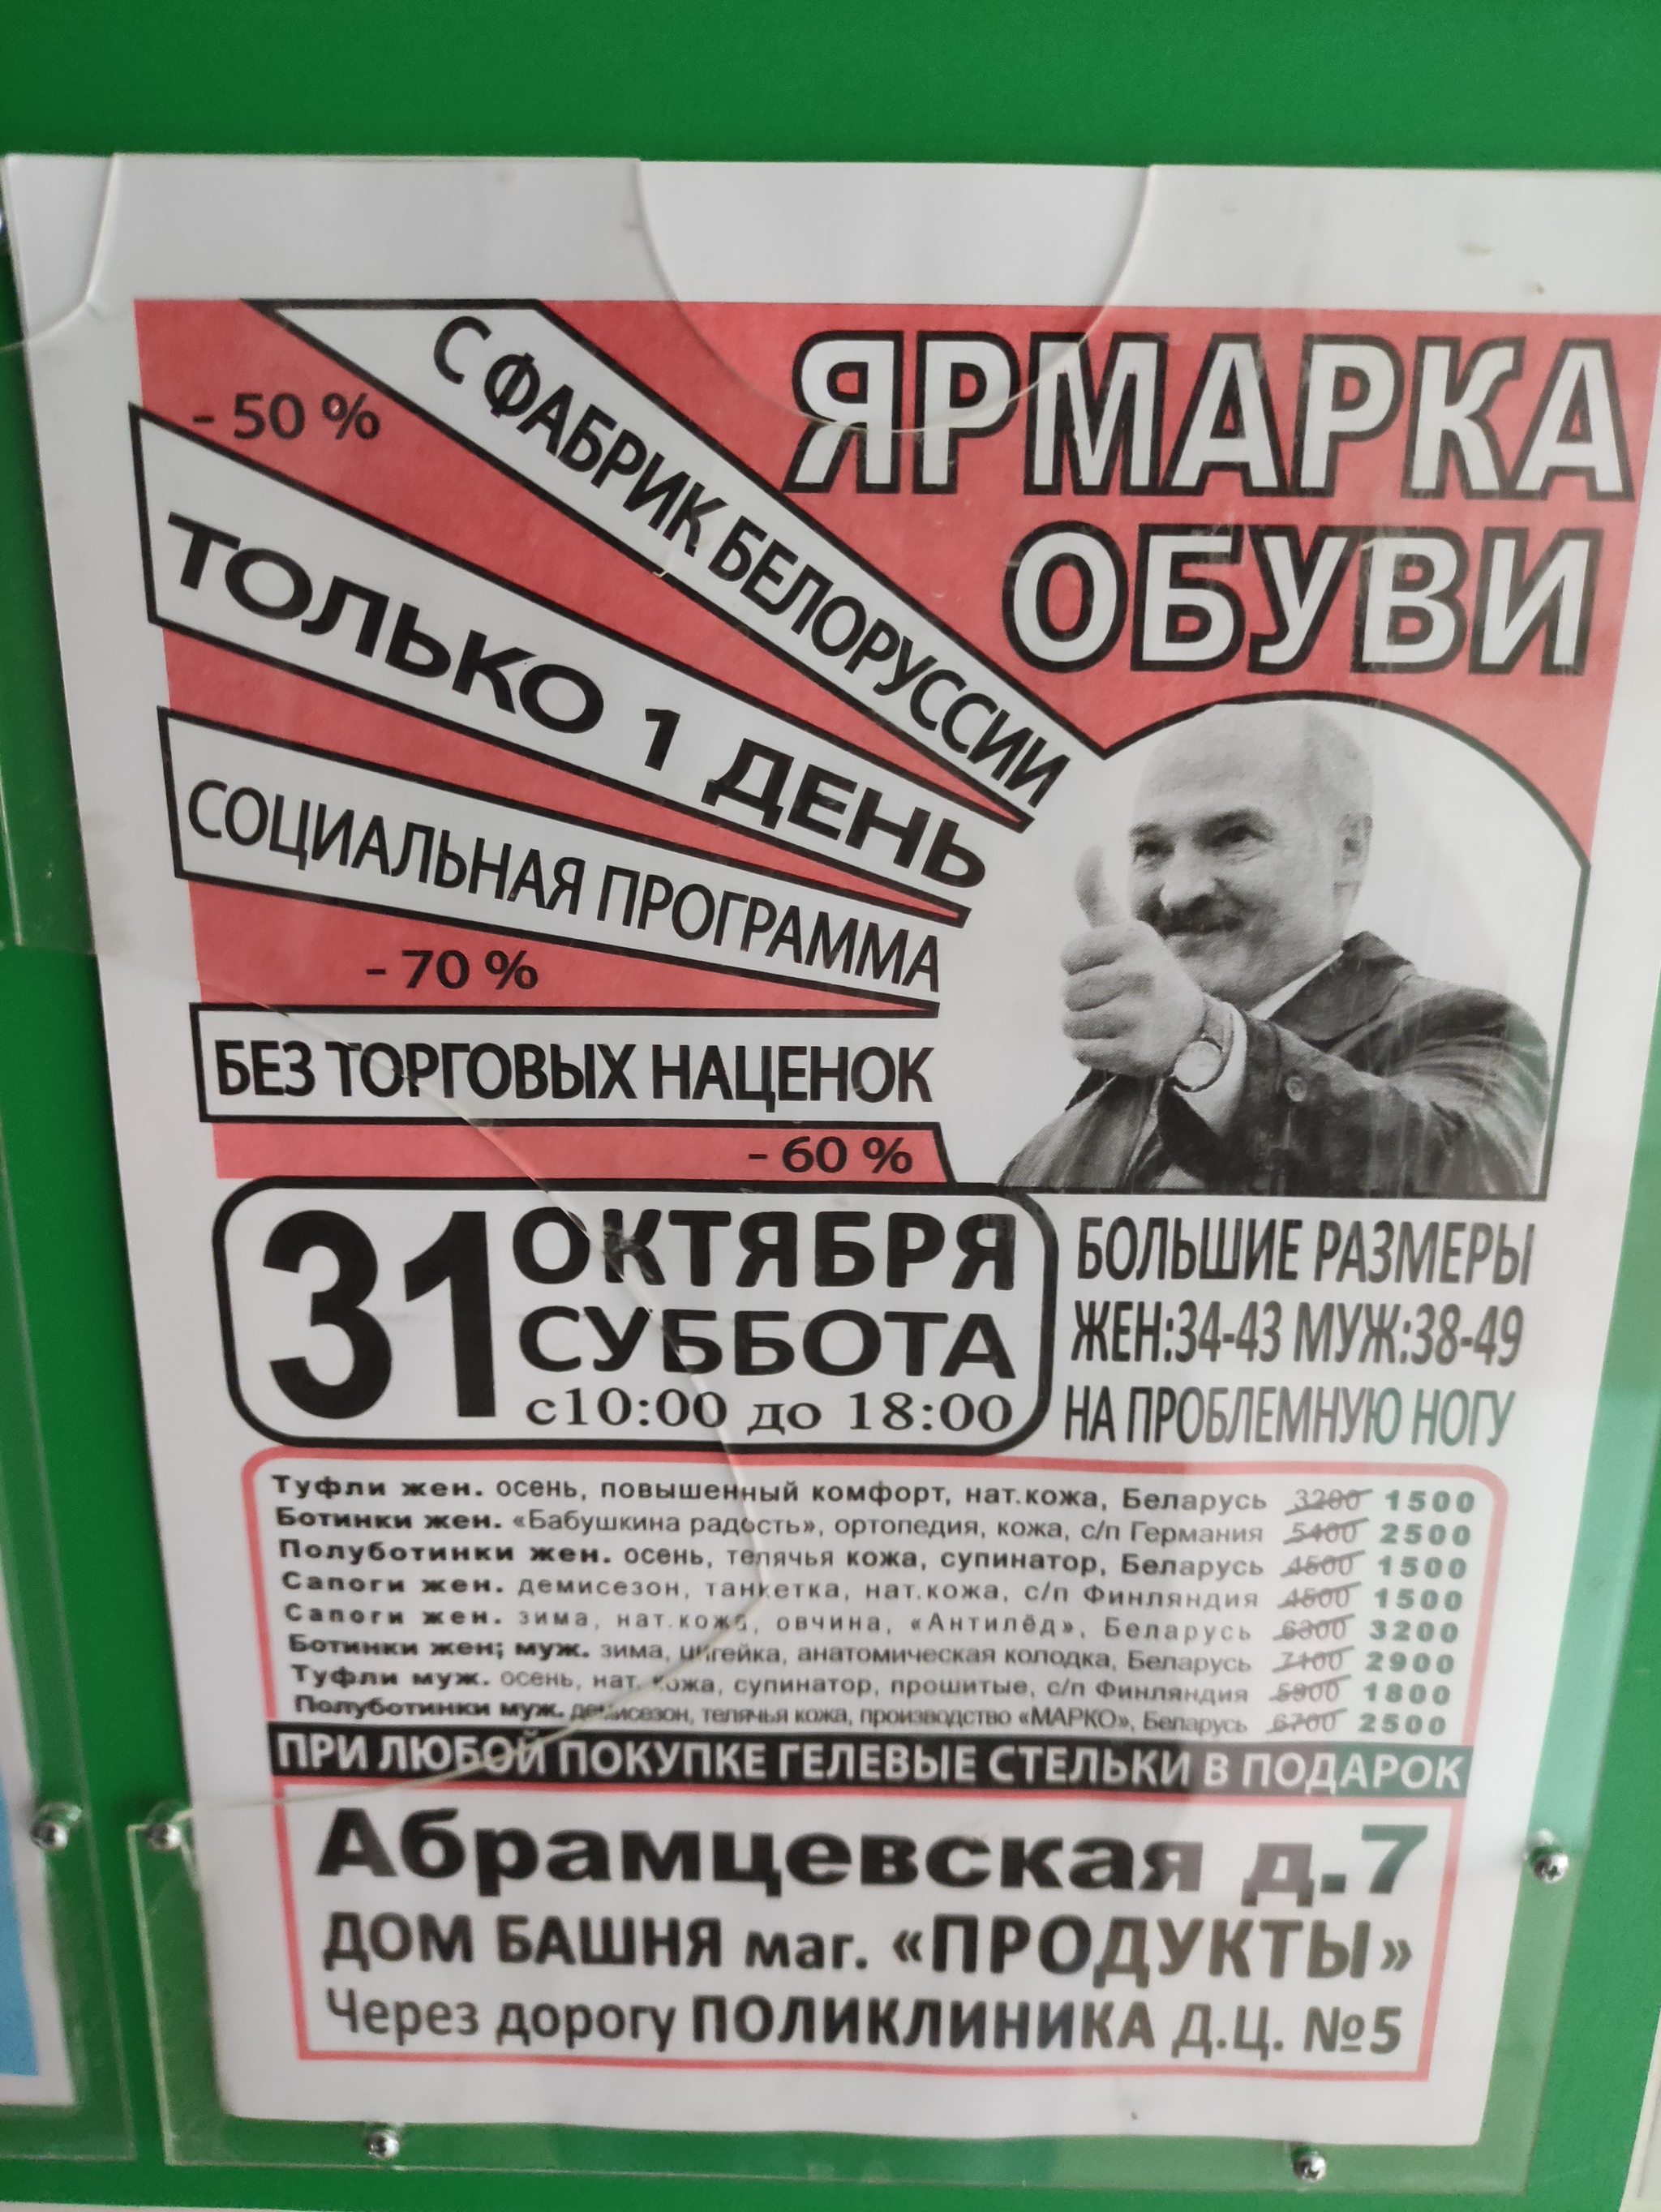 While there is a revolution in Belarus, in Moscow... - Protests in Belarus, Alexander Lukashenko, Humor